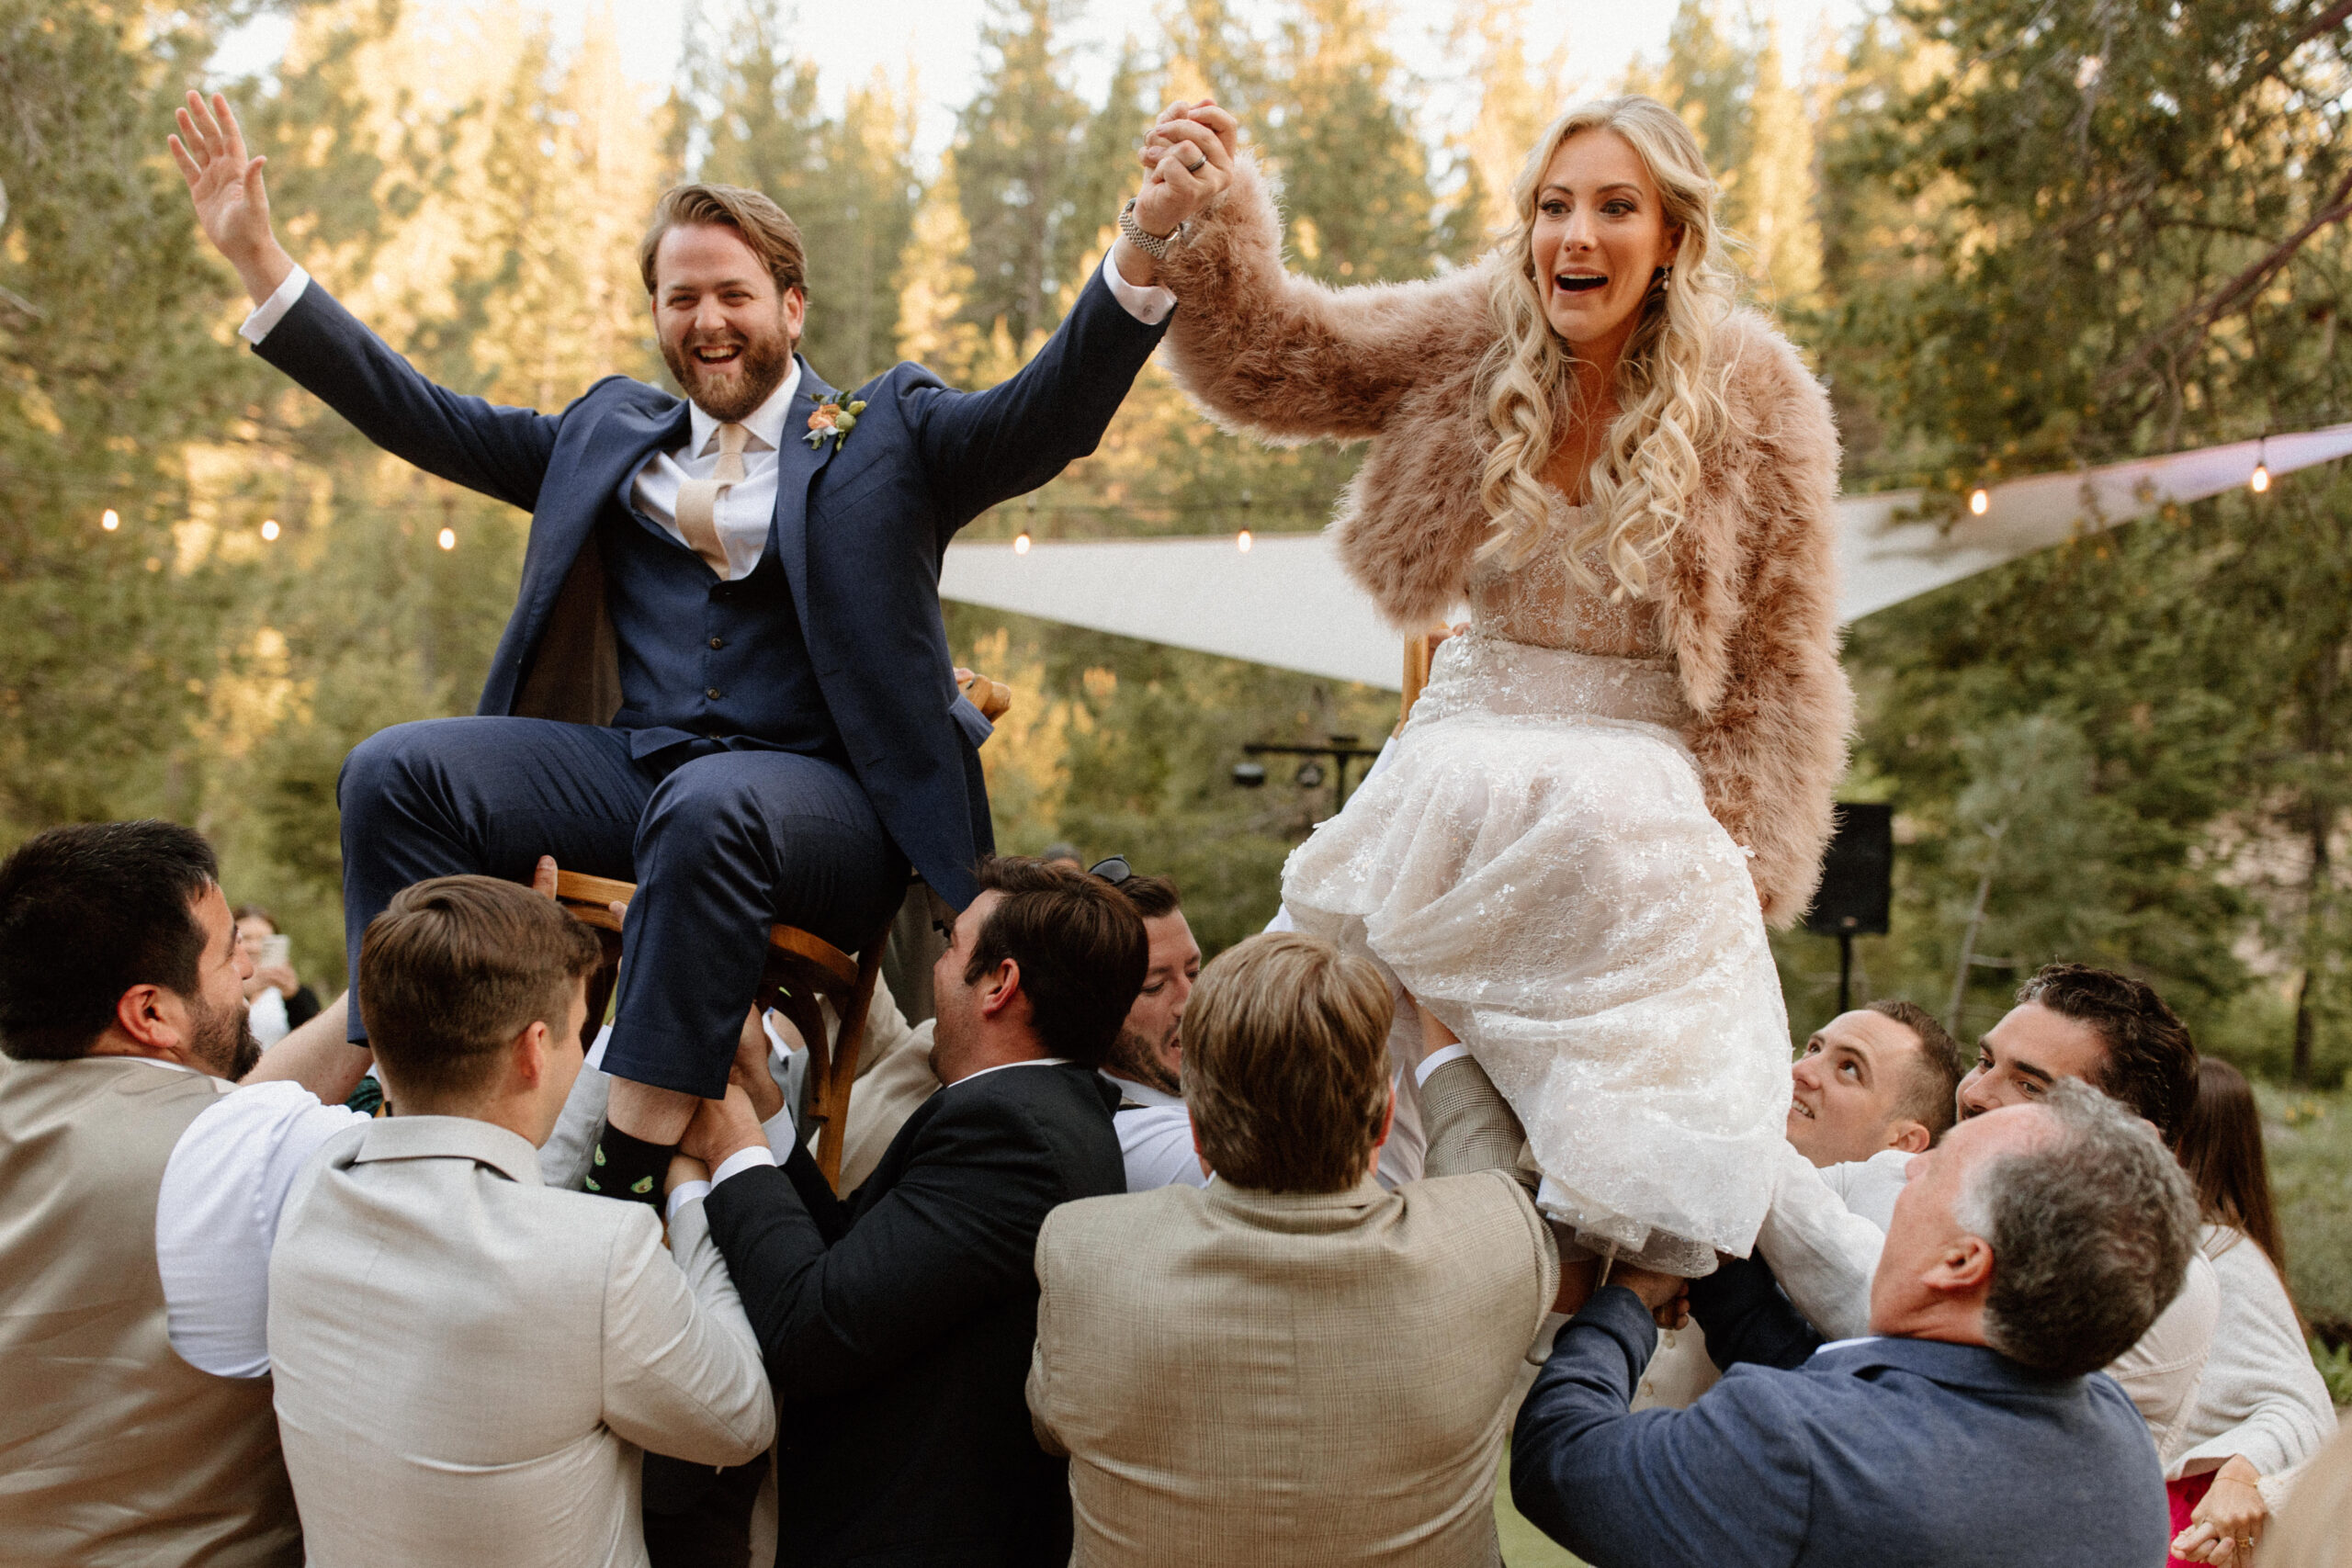 bride and groom get lifted in air by their guests